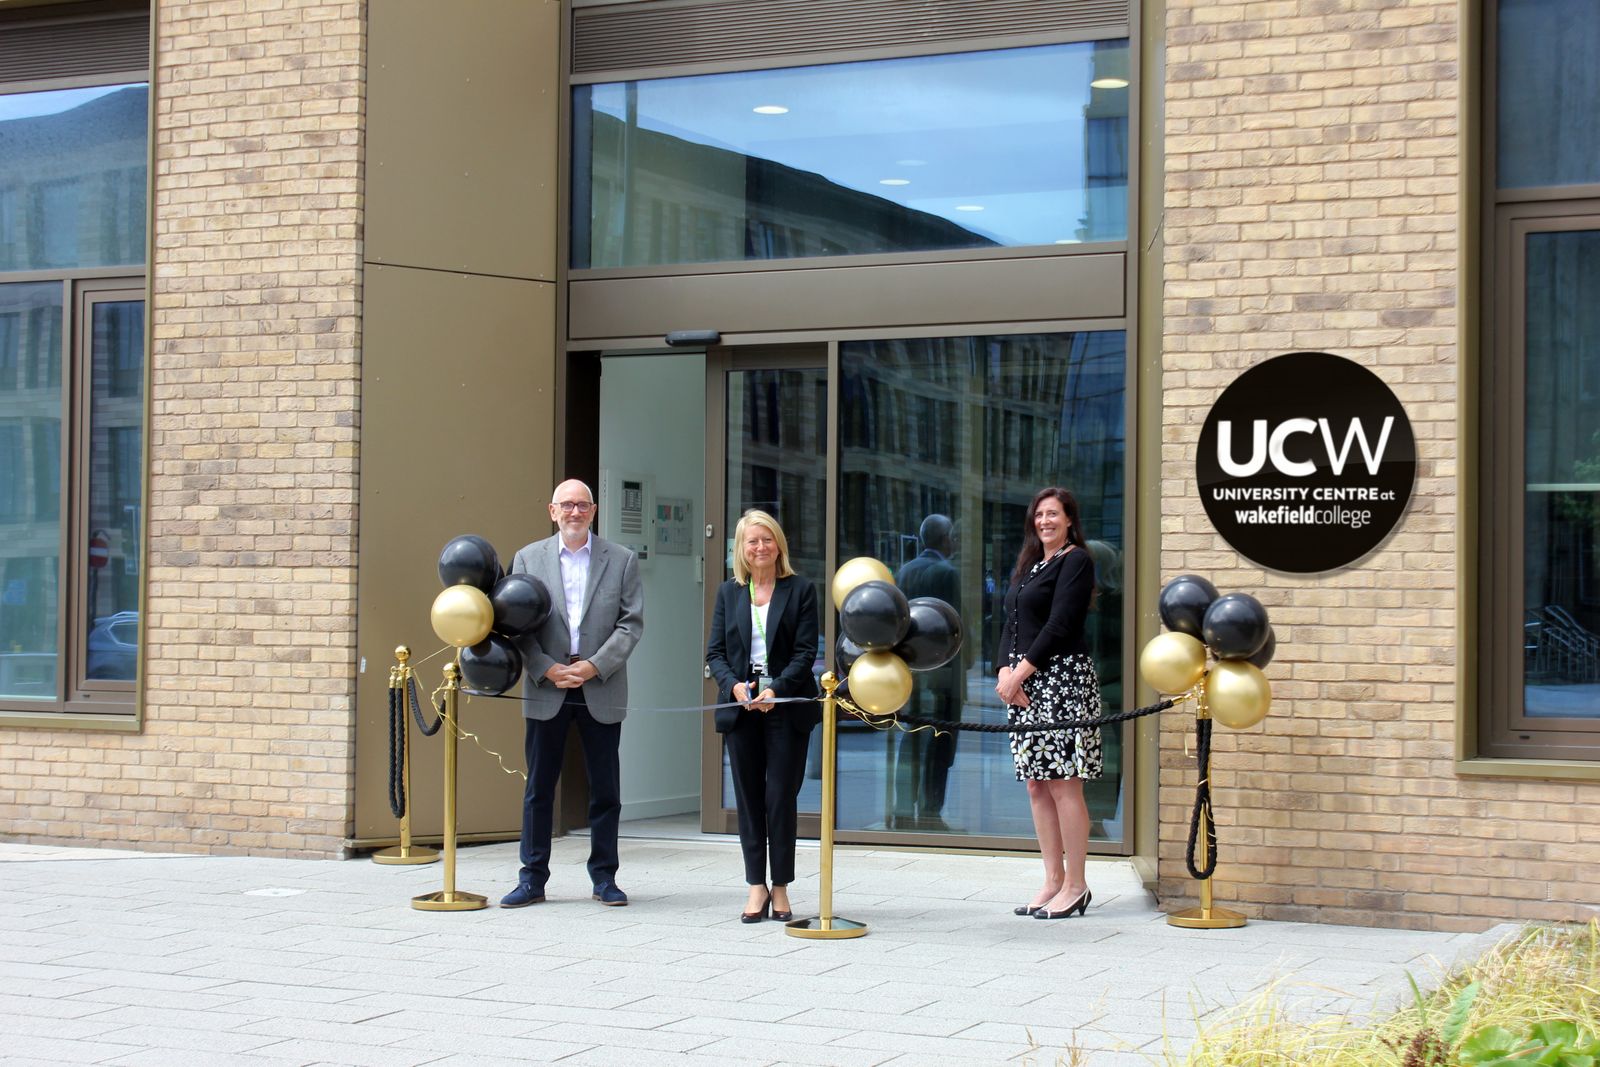 Exciting relaunch for the University Centre at Wakefield College (UCW)